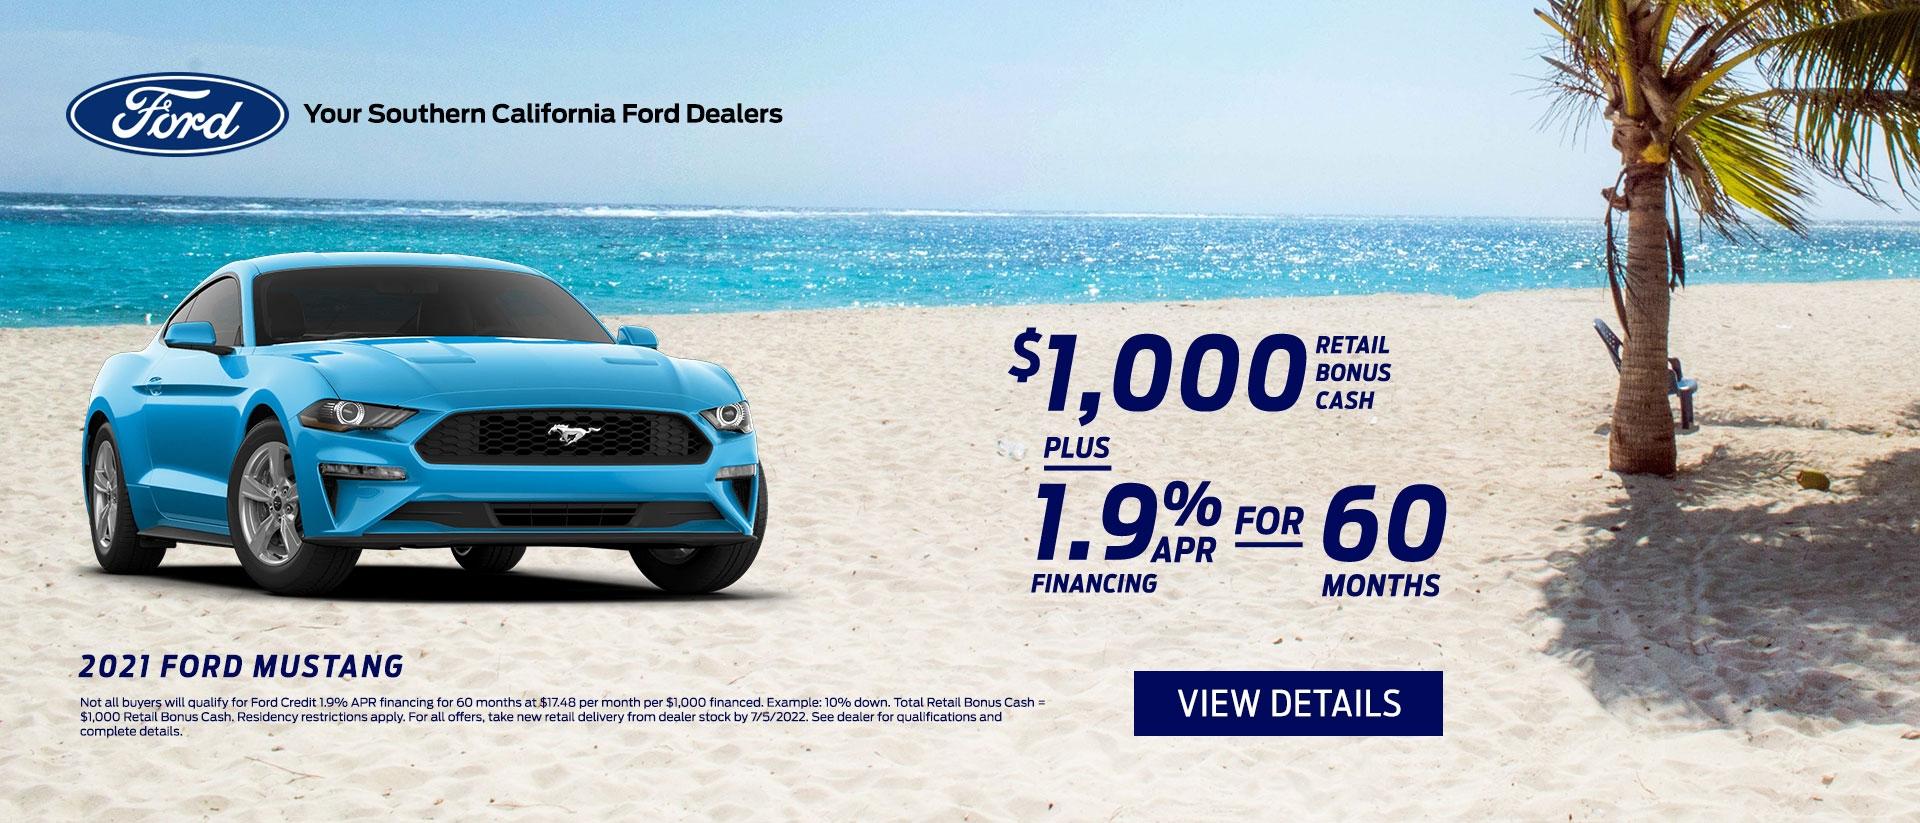 Mustang Offers | Southern California Ford Dealers